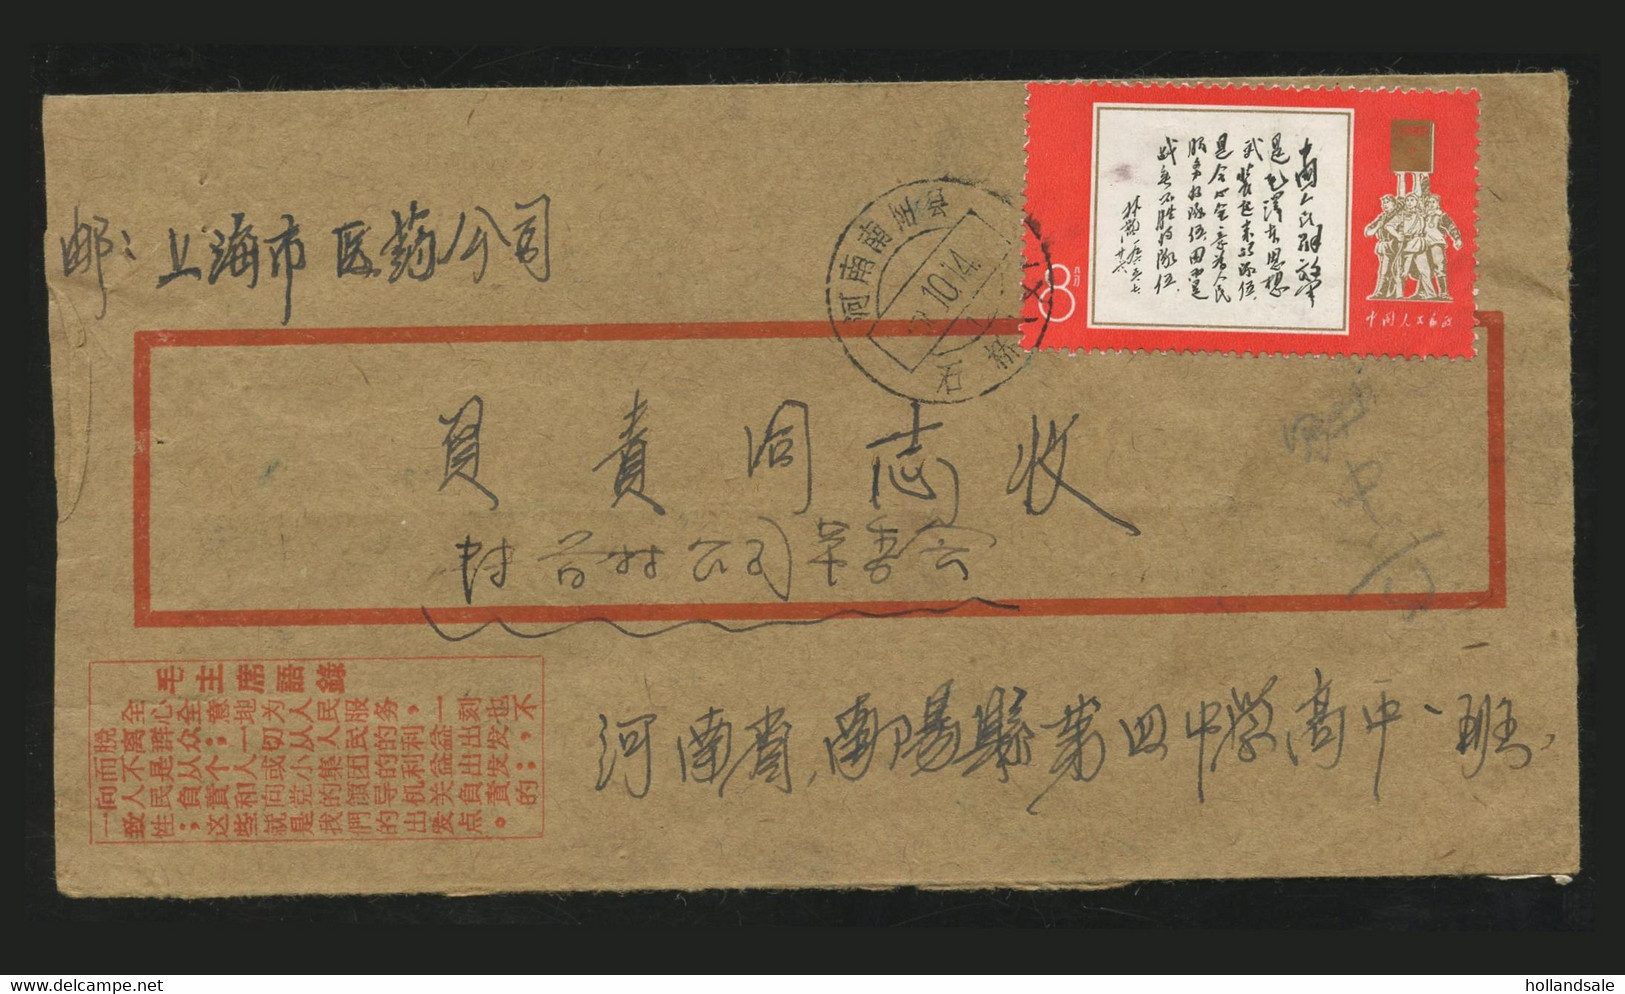 CHINA PRC - 1968, October 14.  Cover With Stamp W11. - Brieven En Documenten